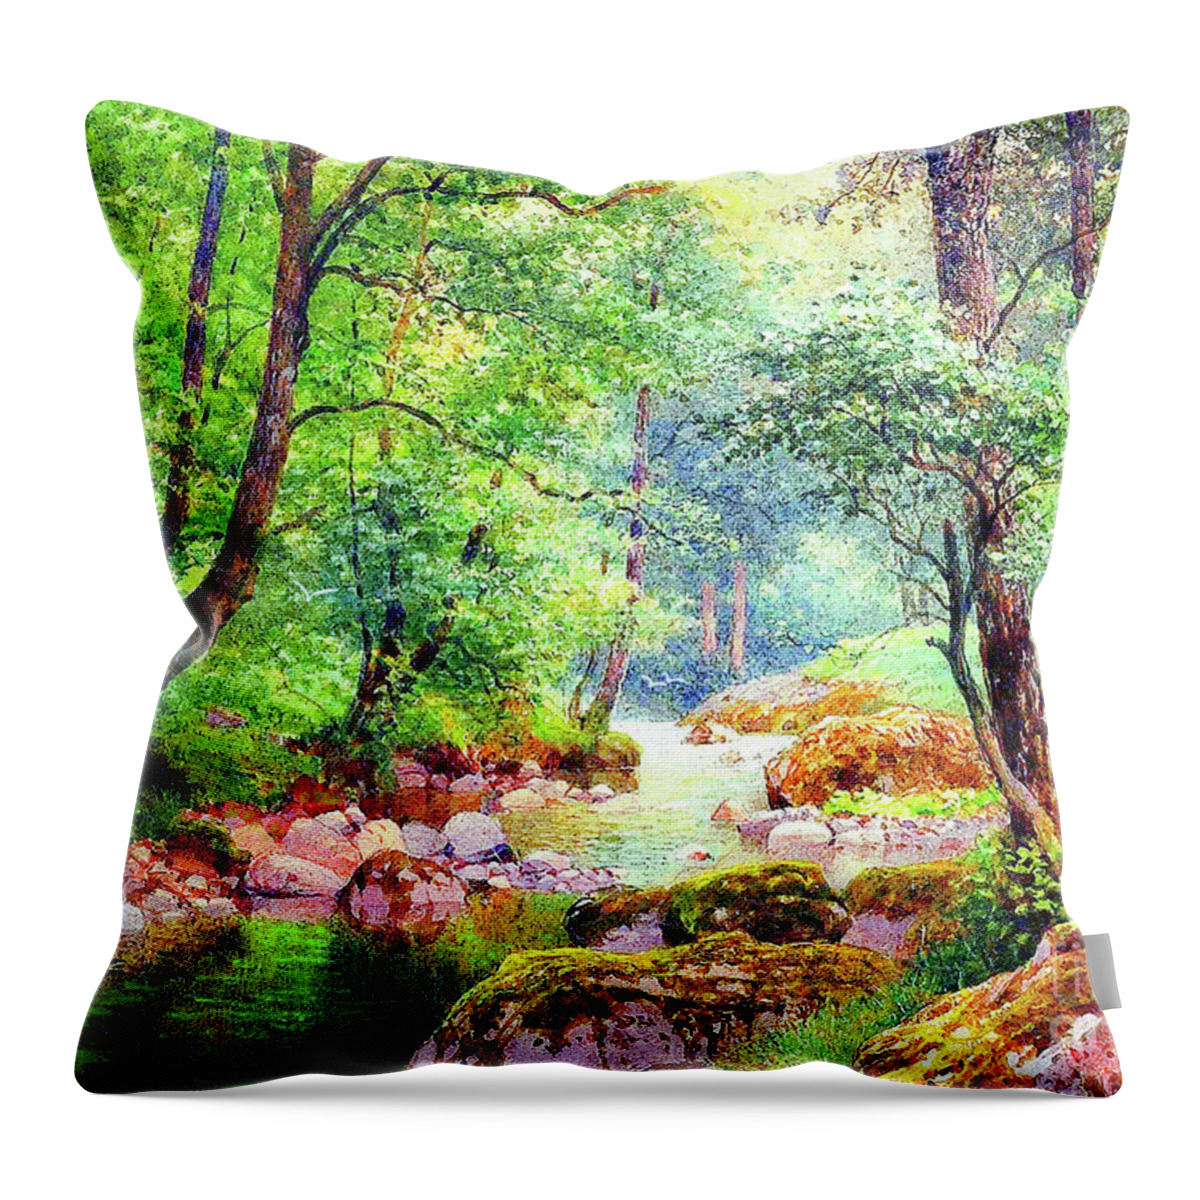 Landscape Throw Pillow featuring the painting Blissful Stream by Jane Small